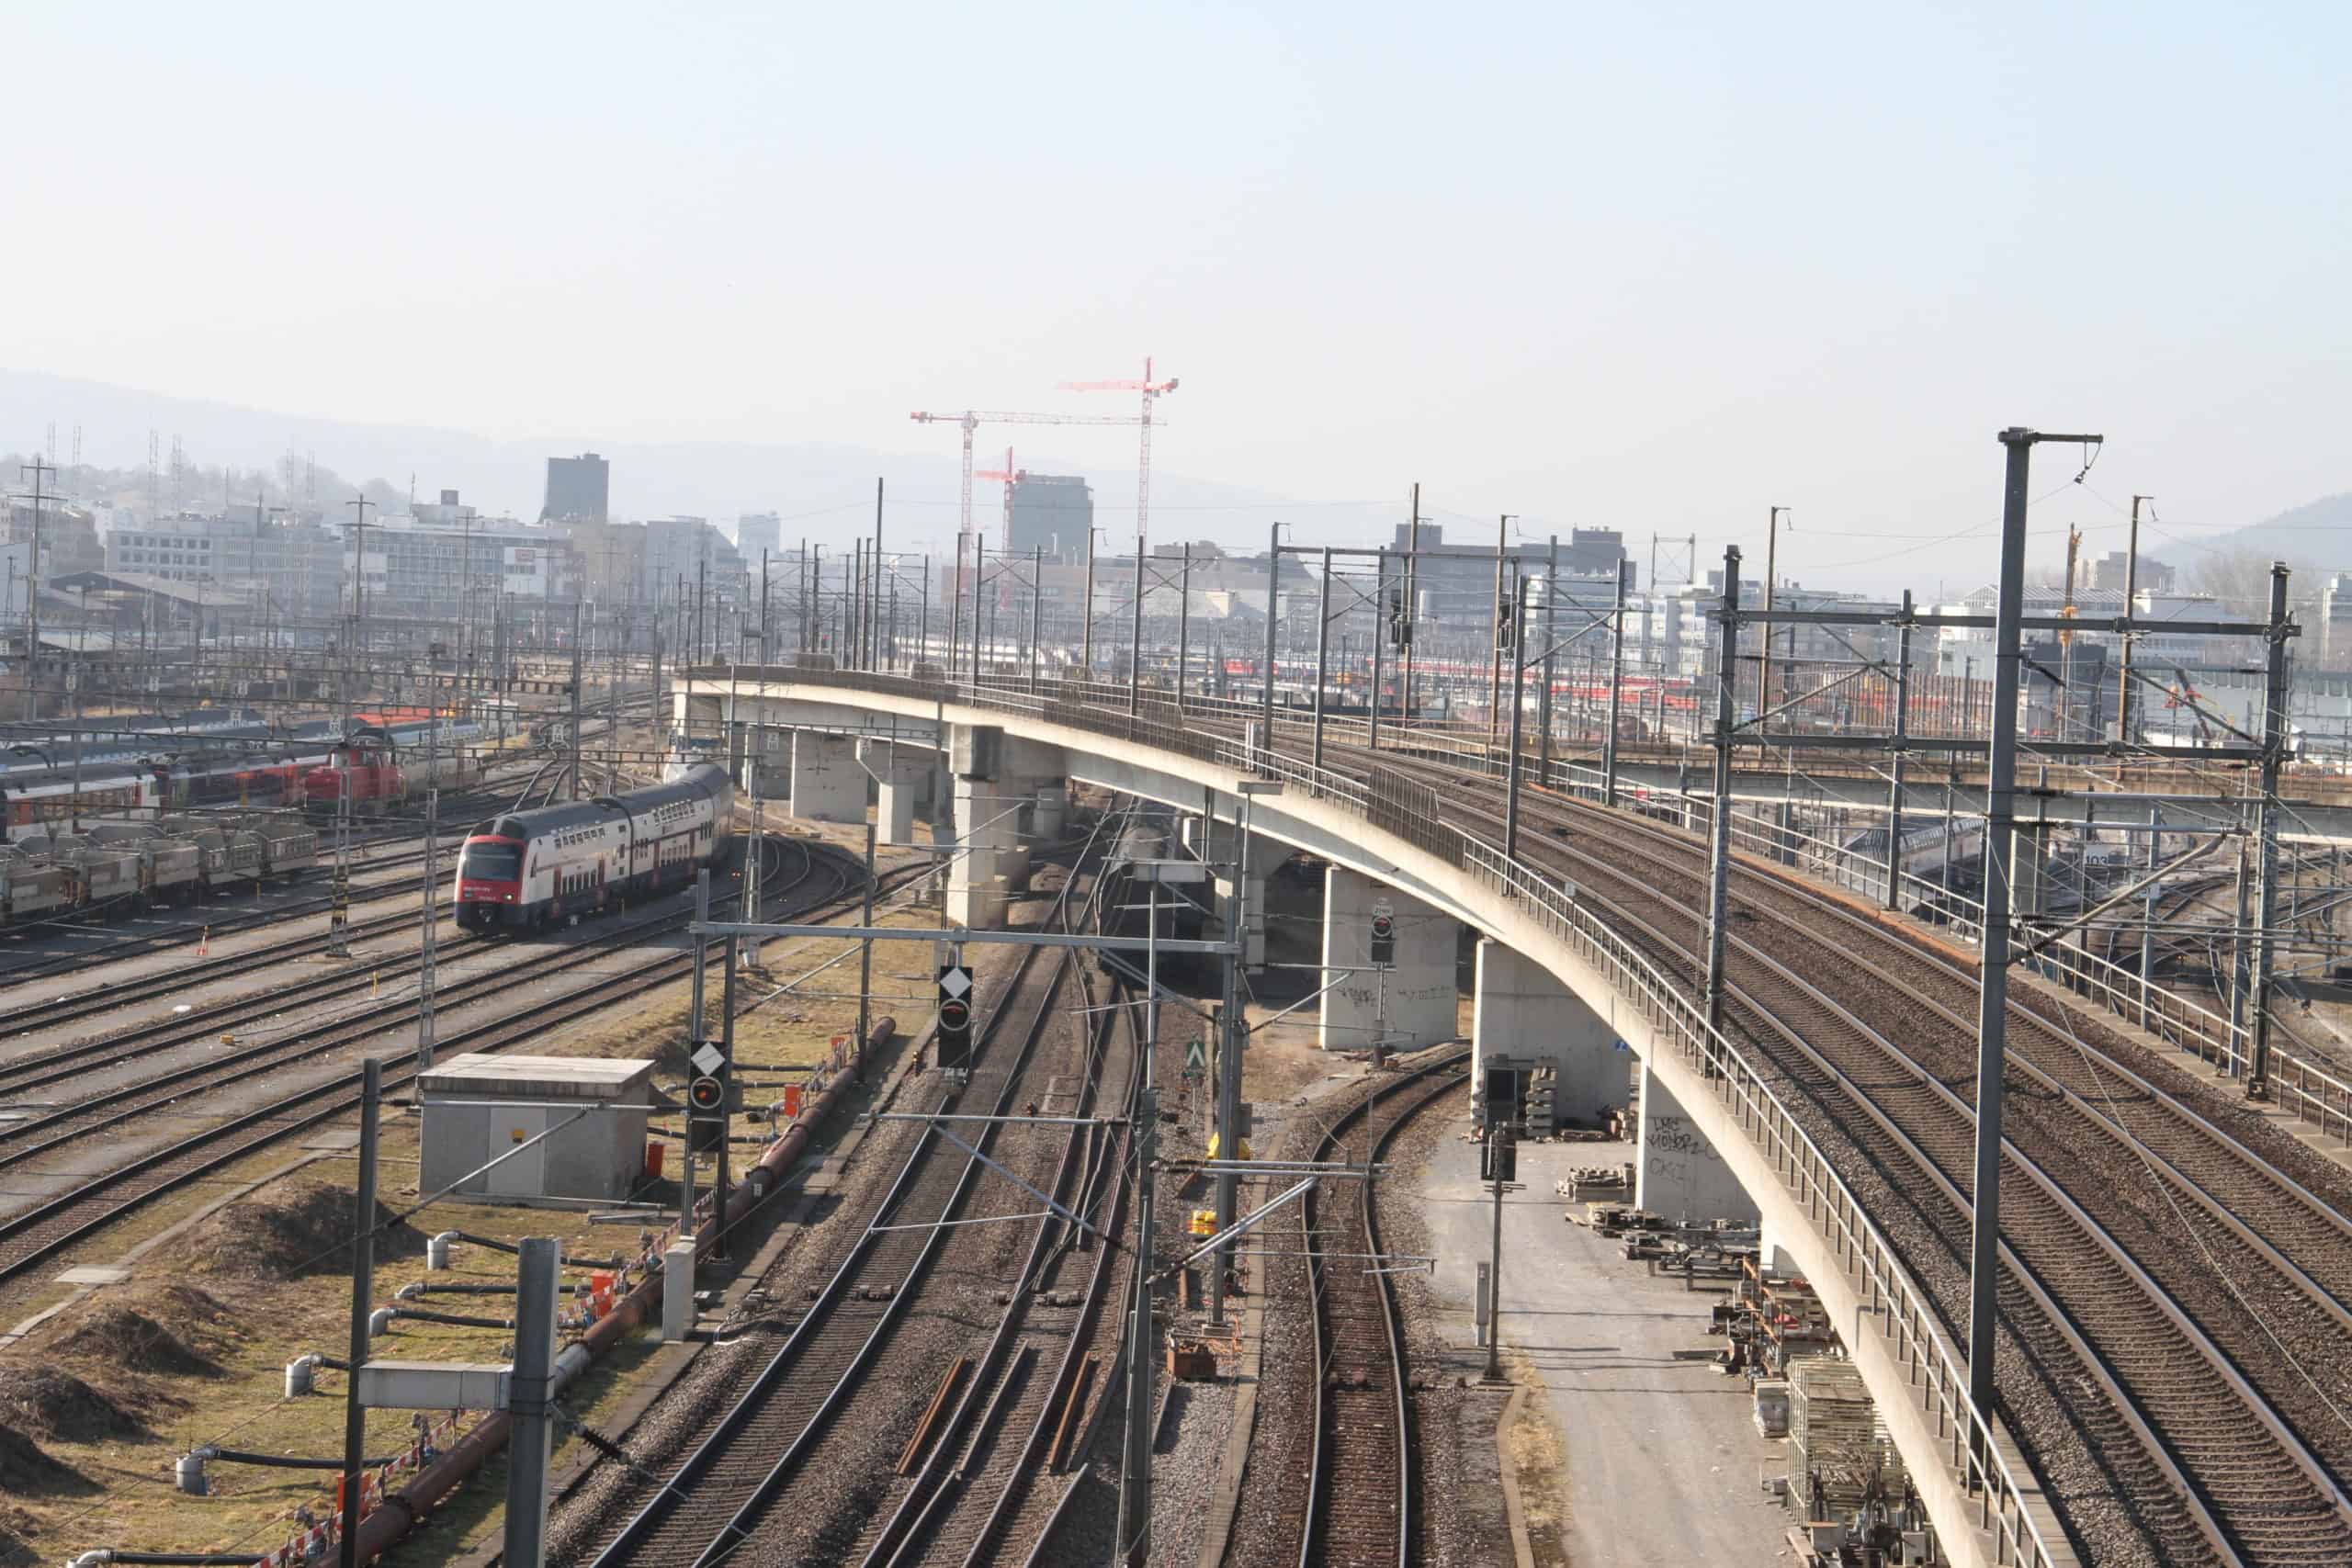 several high-speed trains on tracks at a busy junction and railway bridge in the foreground and a large city with high-rise buildings and cranes in the background